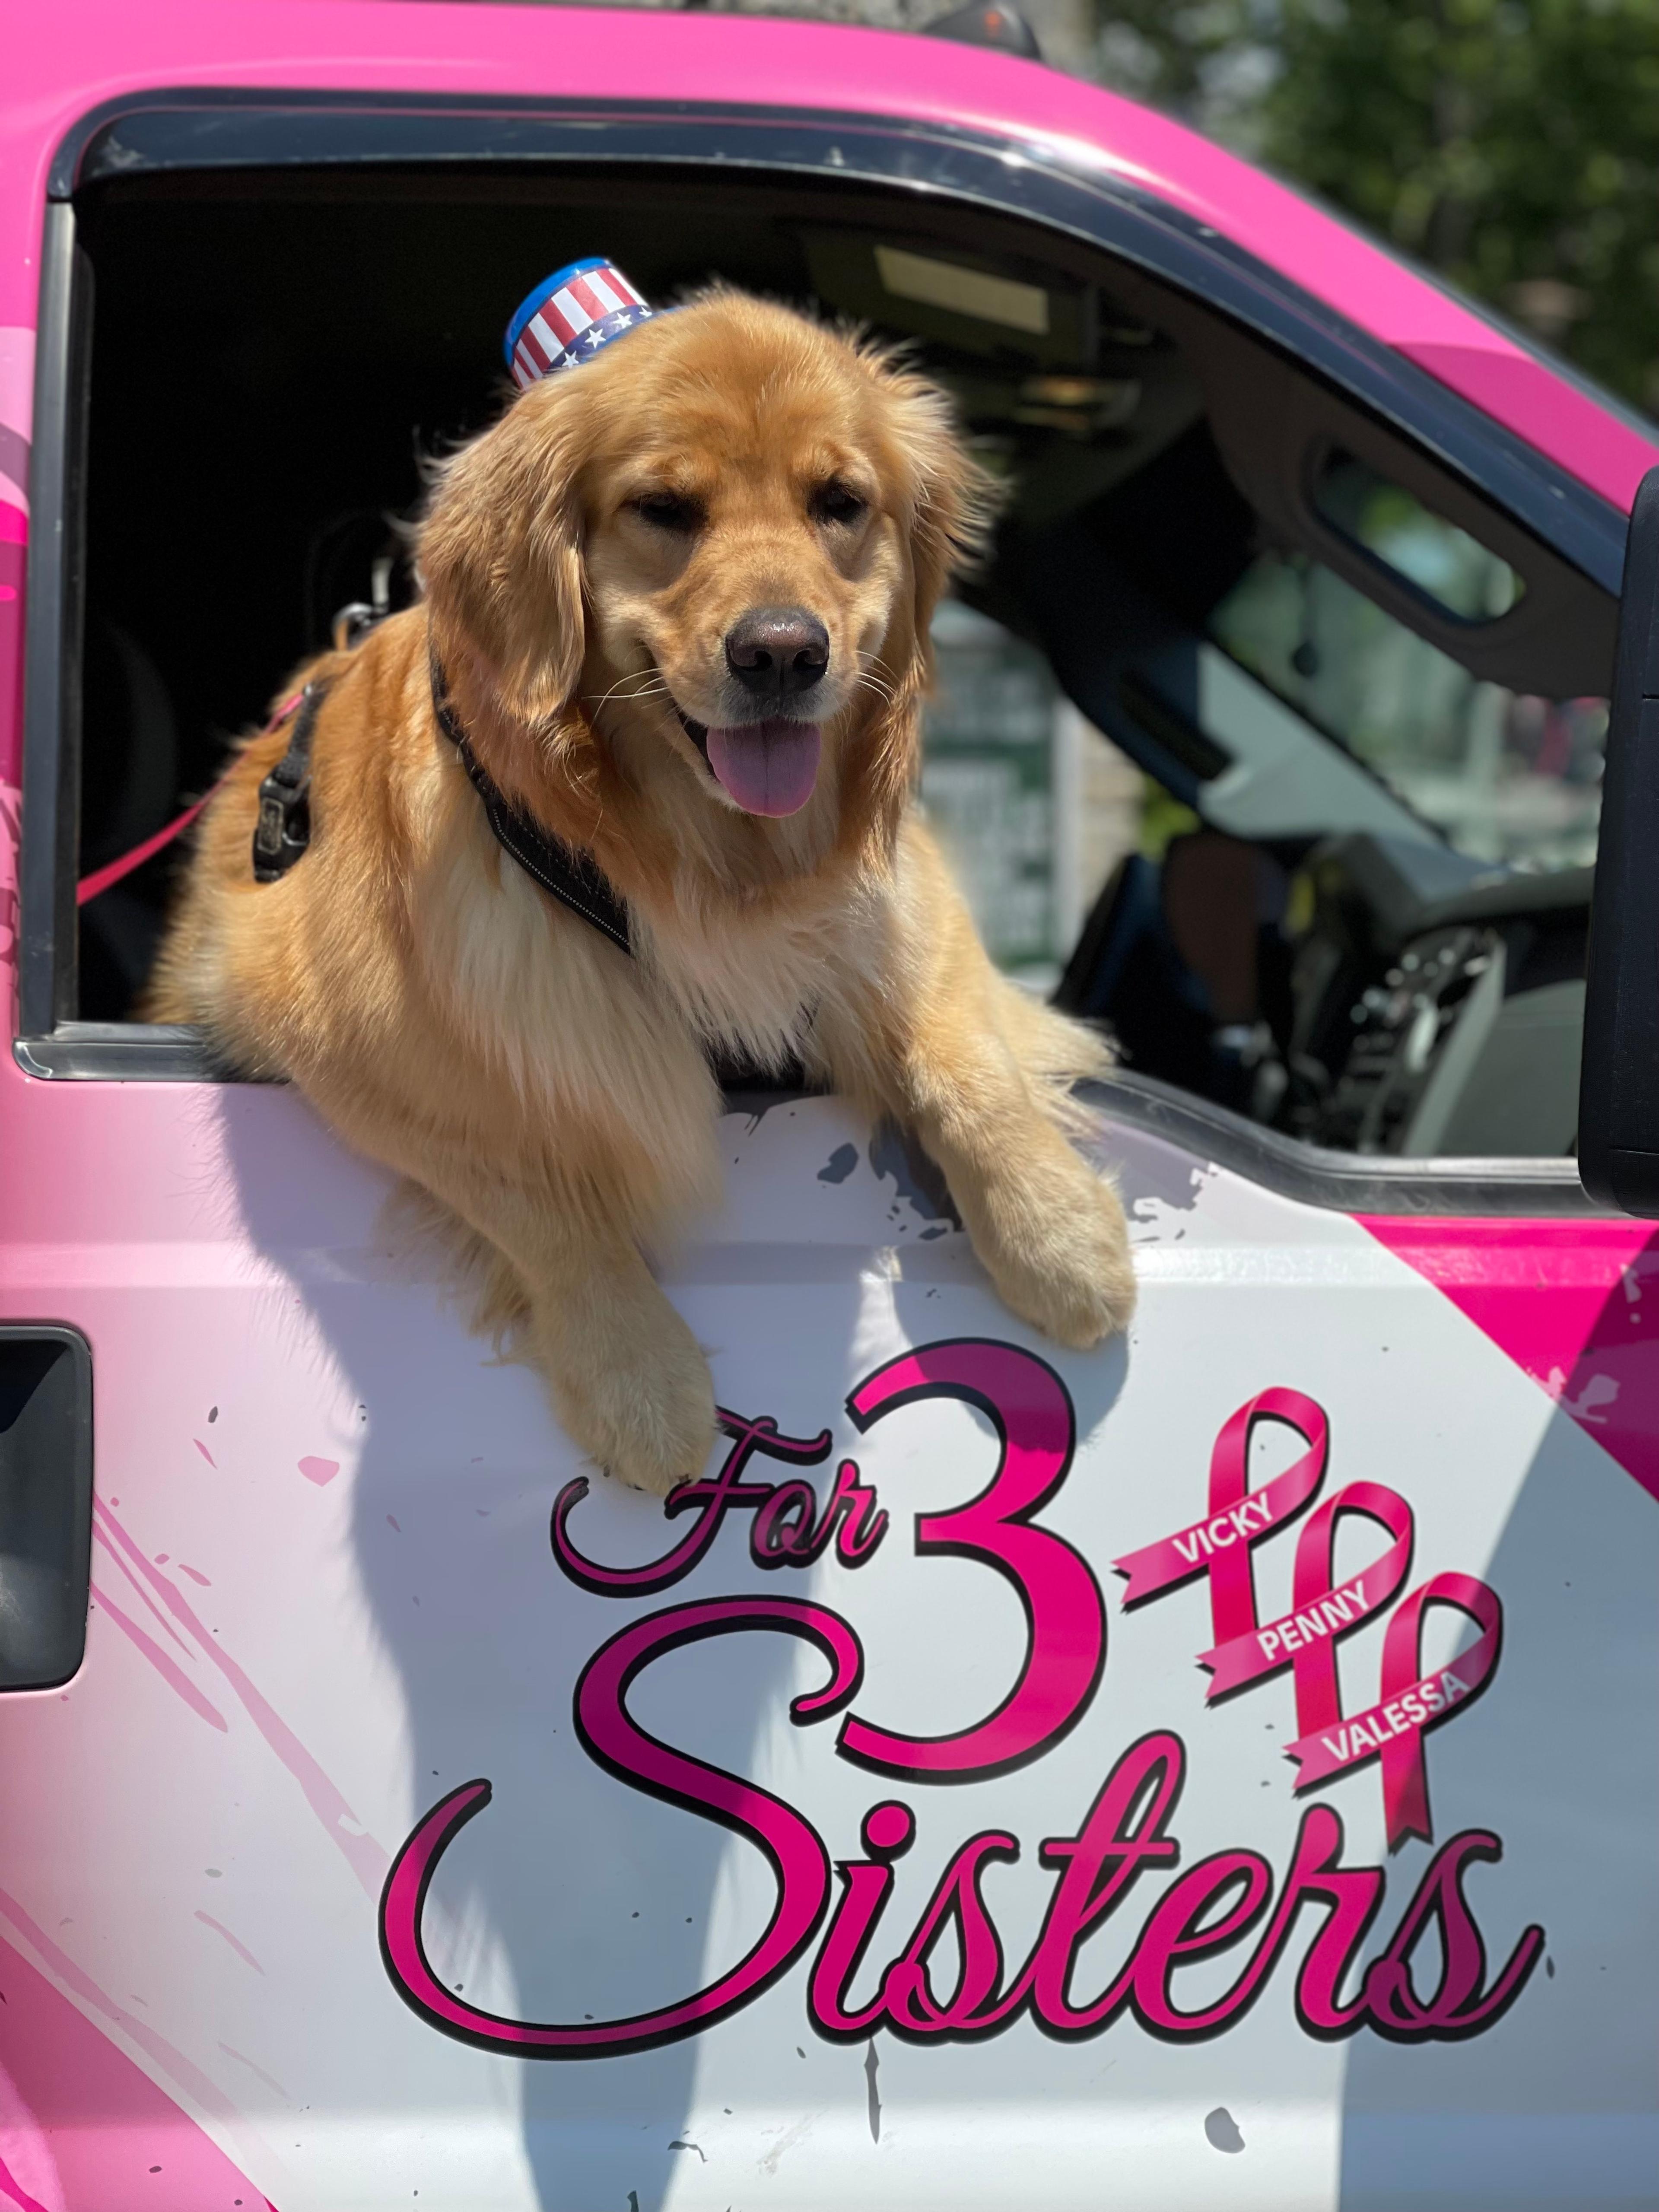 Golden retriever dog hanging out of the For 3 Sisters truck window